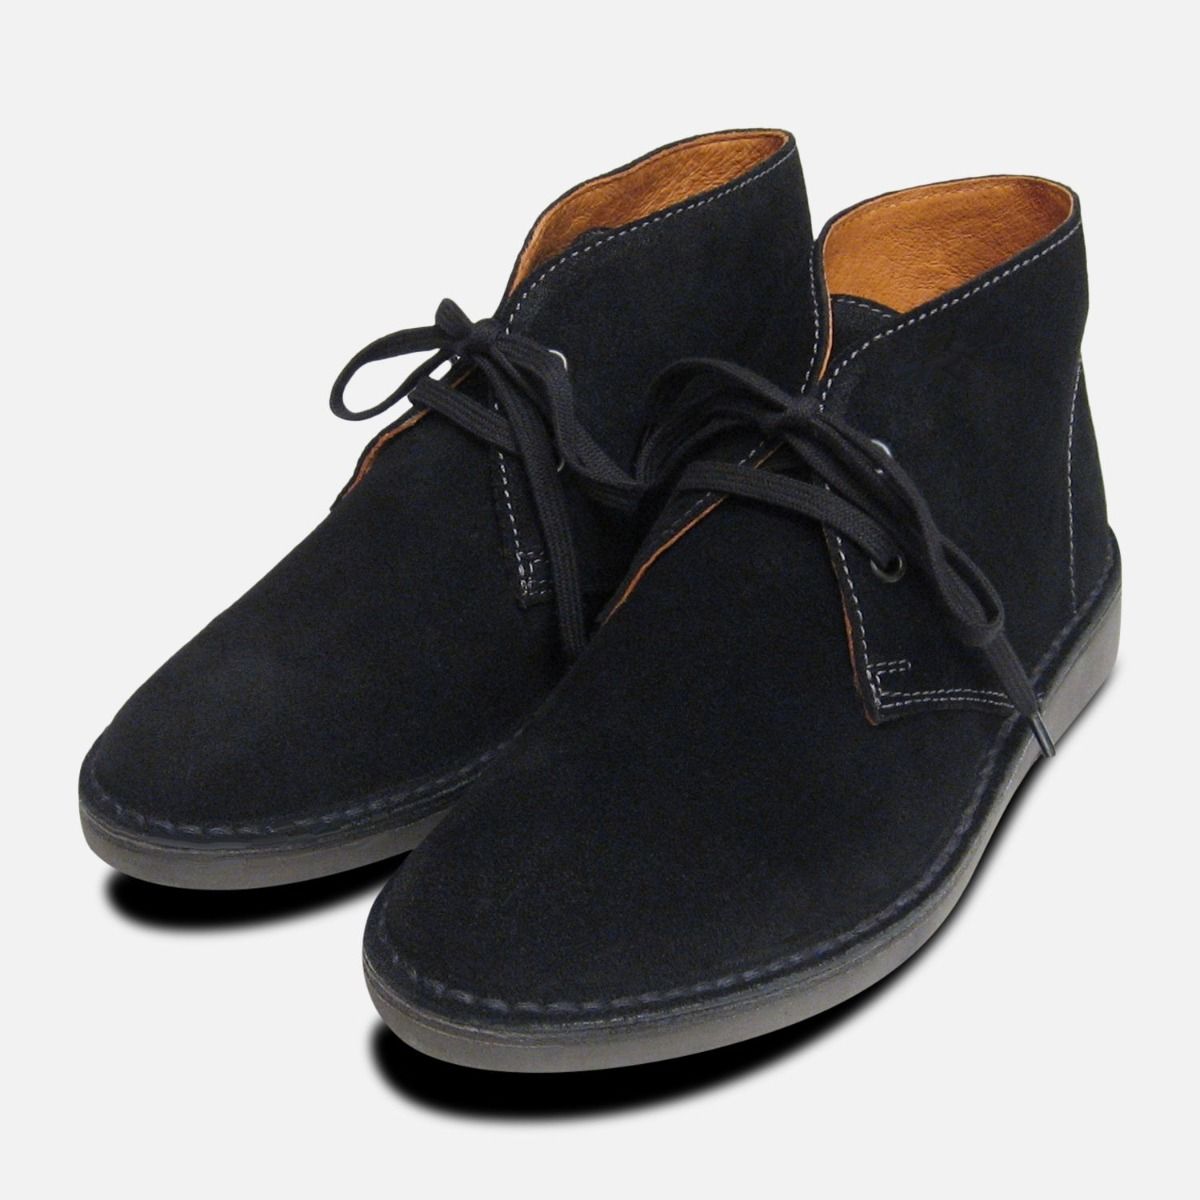 black suede shoes for ladies